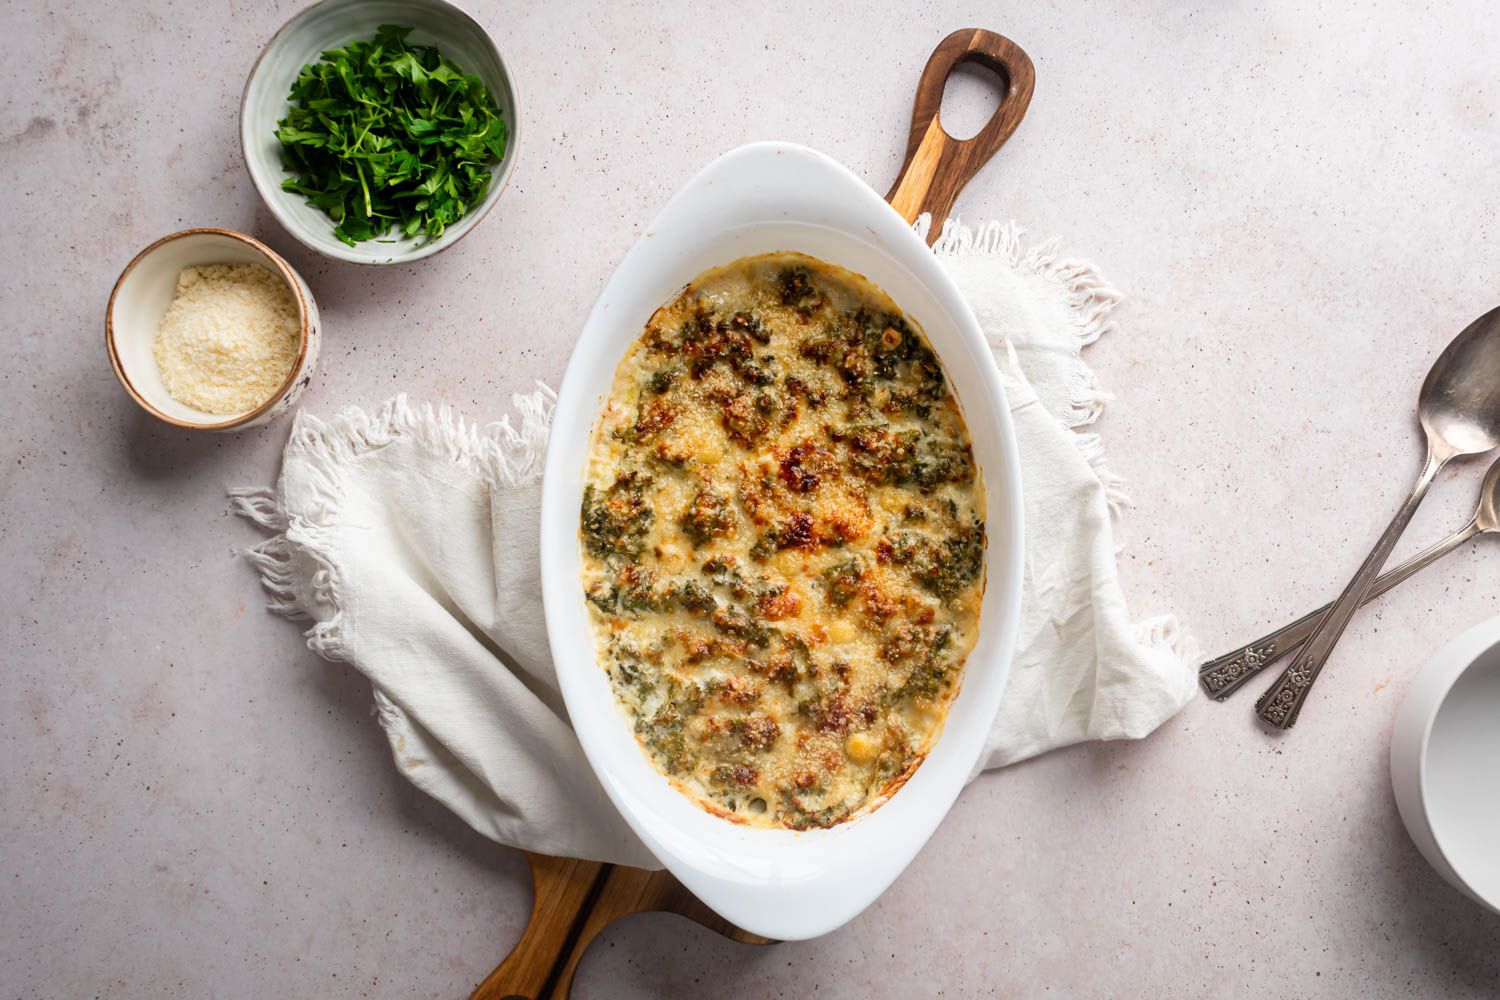 Creamed Kale makes a yummy low carb side dish instead of creamed corn.